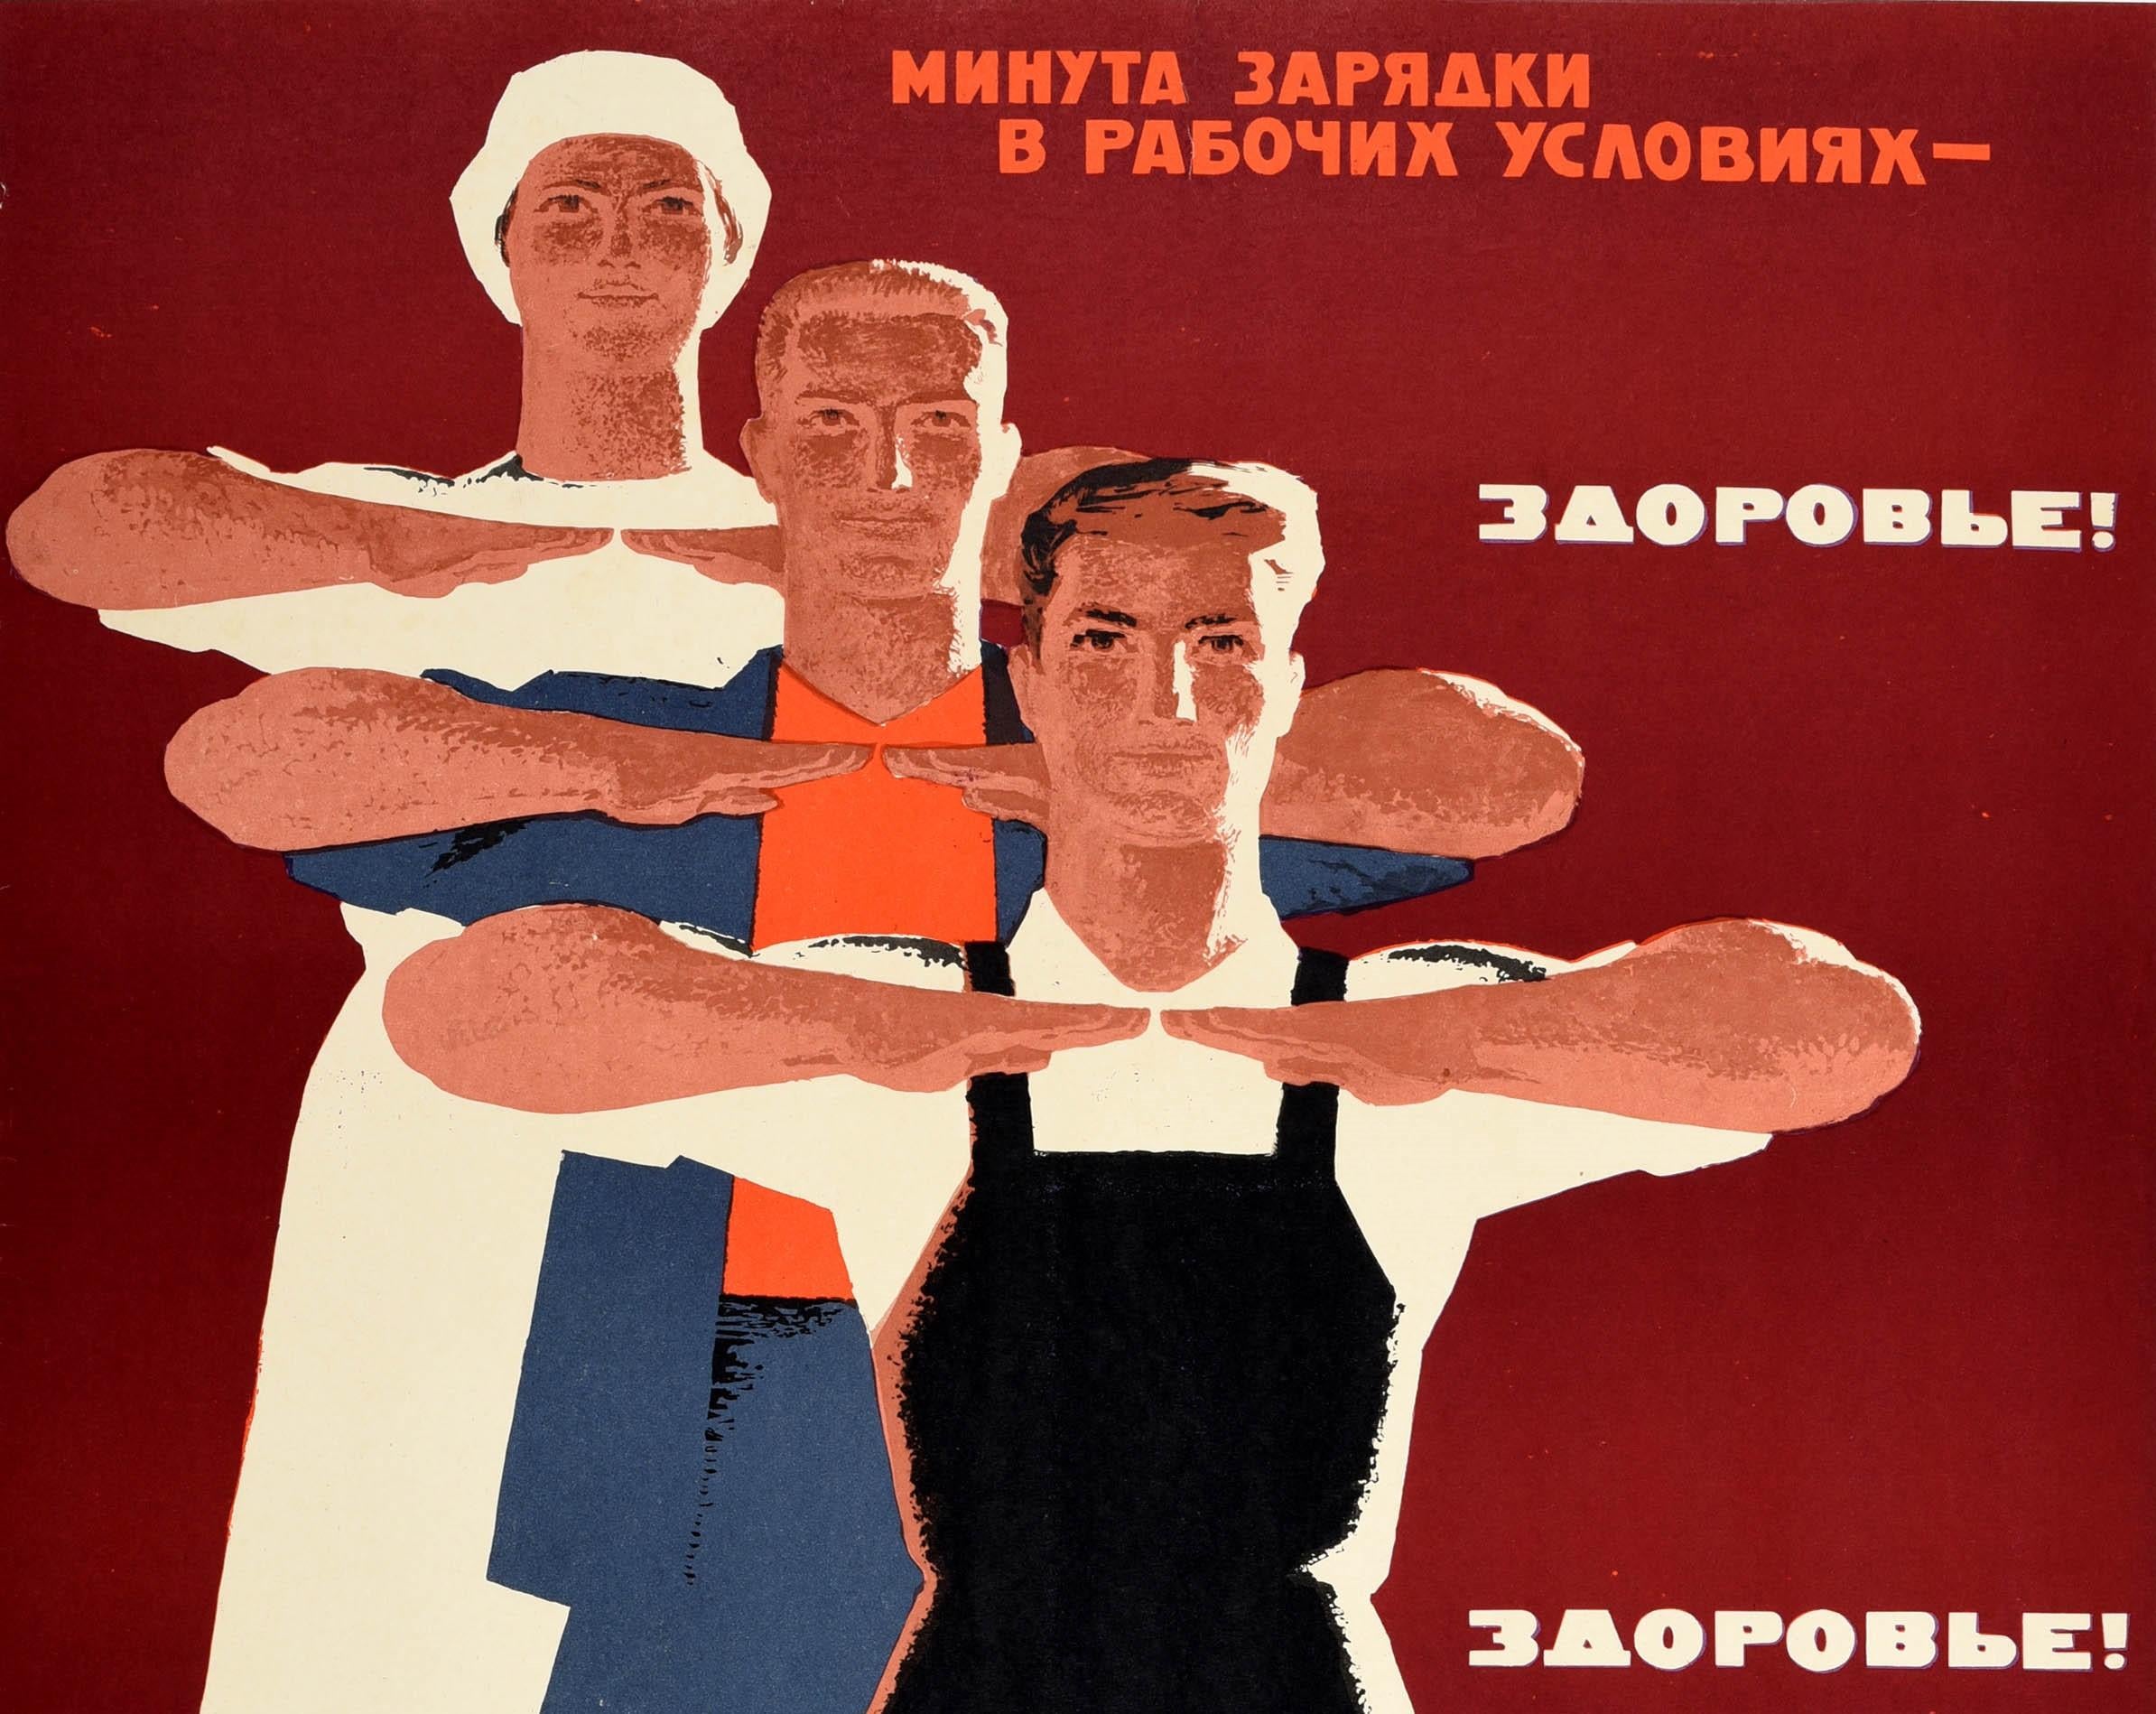 Original vintage Soviet propaganda poster - A minute of charging in working conditions Health! Health! Health! / ?????? ??????? ? ??????? ???????? ????????! - featuring a great design depicting three workers in a line doing fitness exercises to